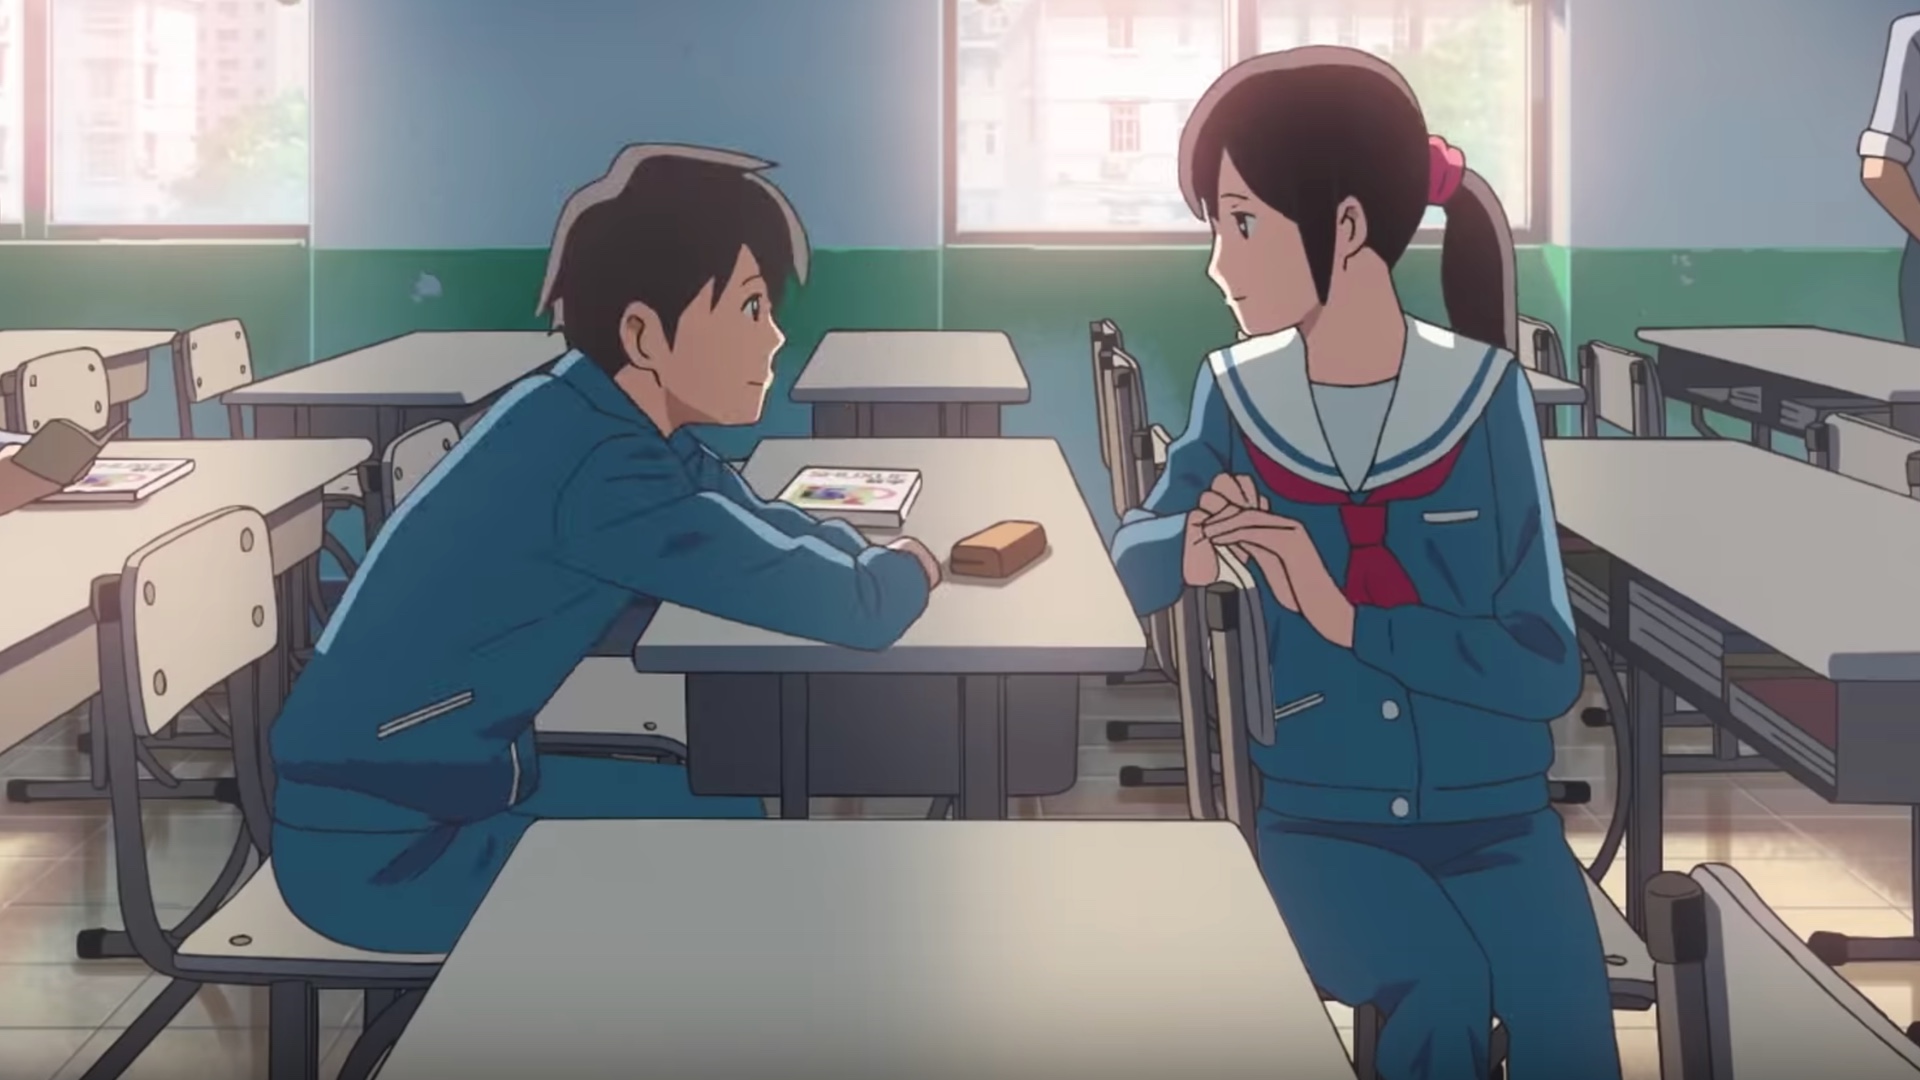 trailer-for-netflixs-anime-film-flavors-of-youth-from-the-studio-behind-your-name-social.jpg